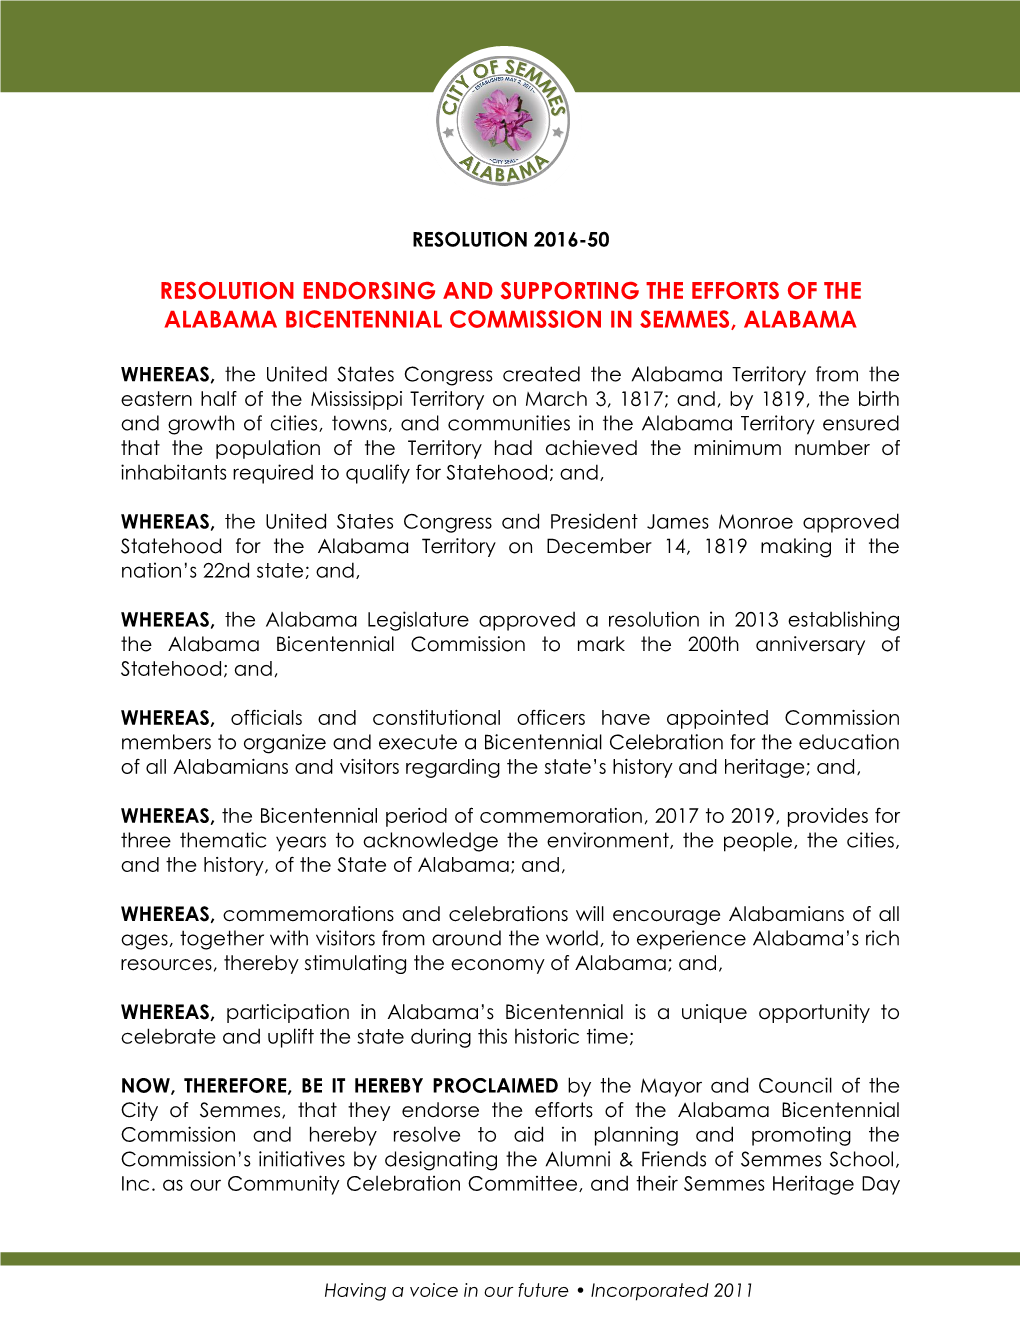 Resolution Endorsing and Supporting the Efforts of the Alabama Bicentennial Commission in Semmes, Alabama